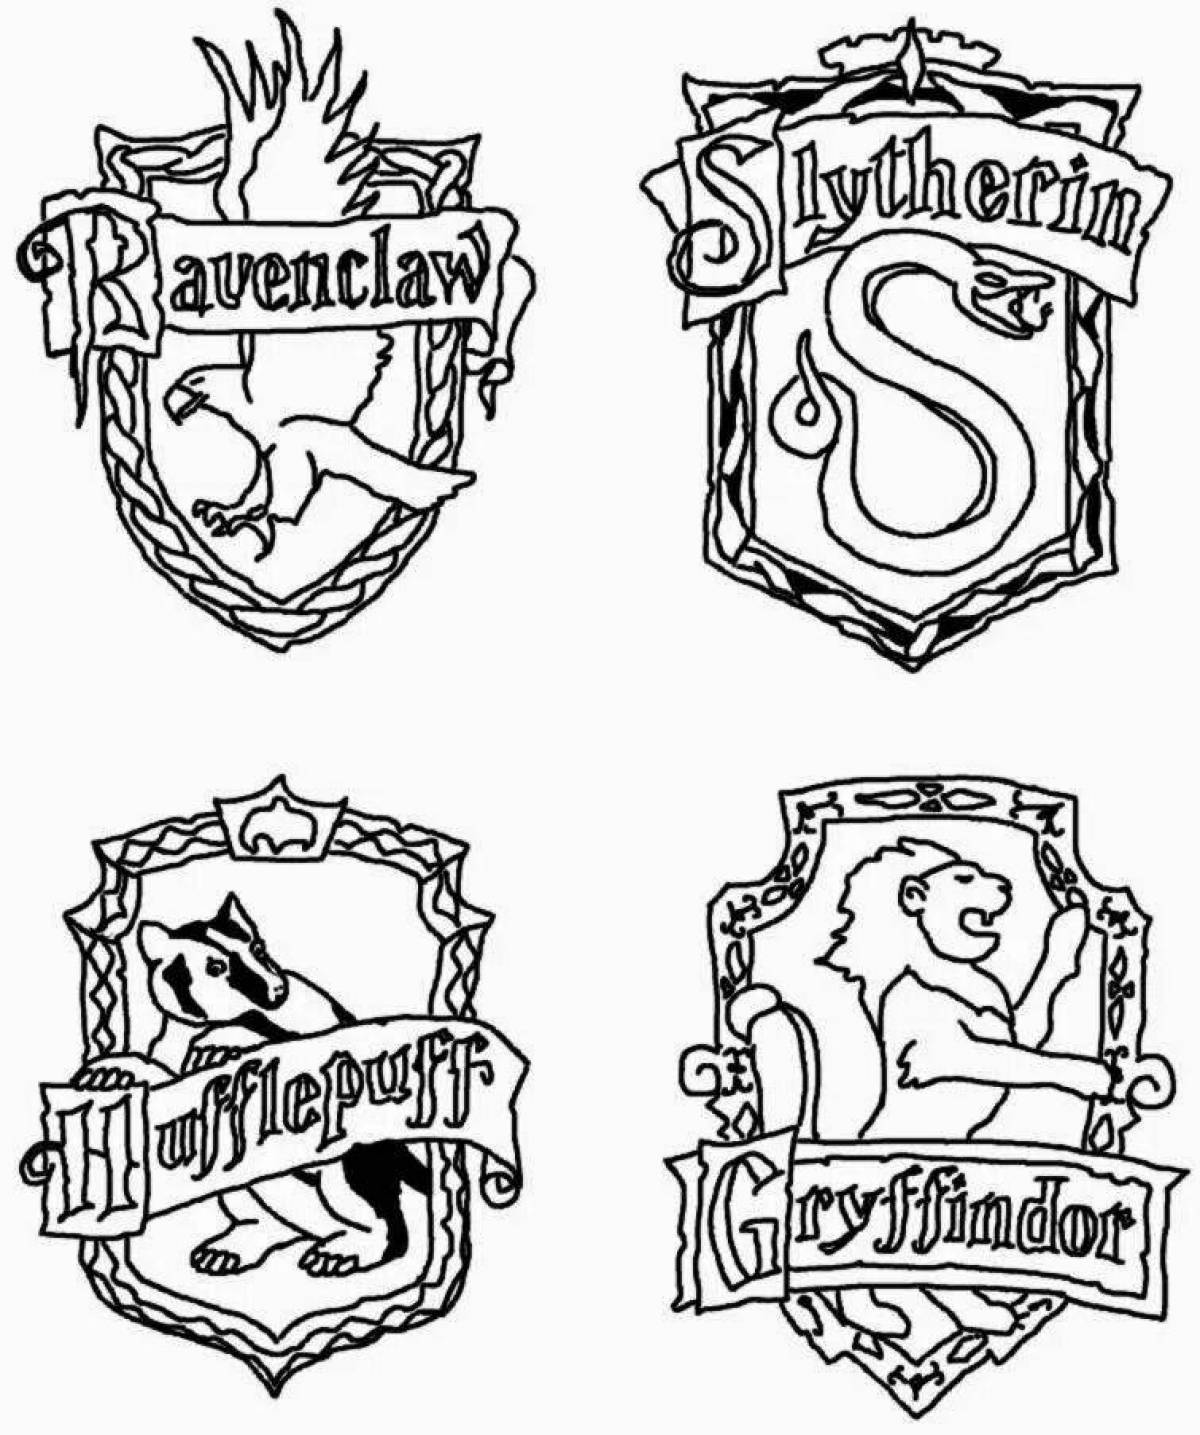 Exciting Slytherin coloring book